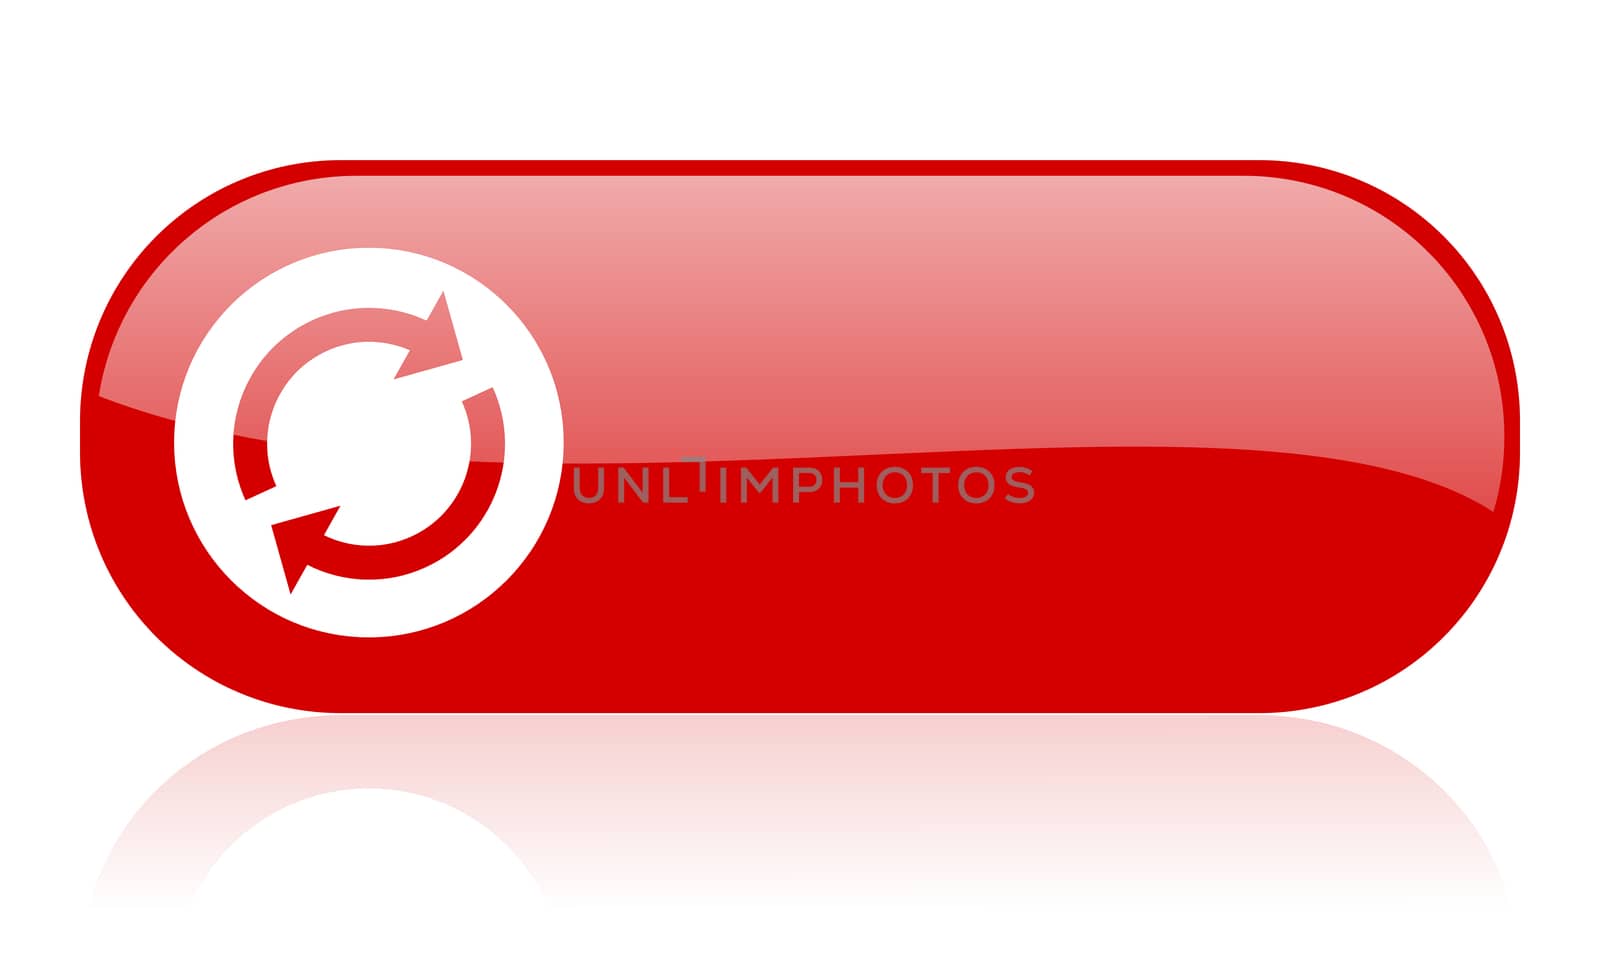 reload red web glossy icon